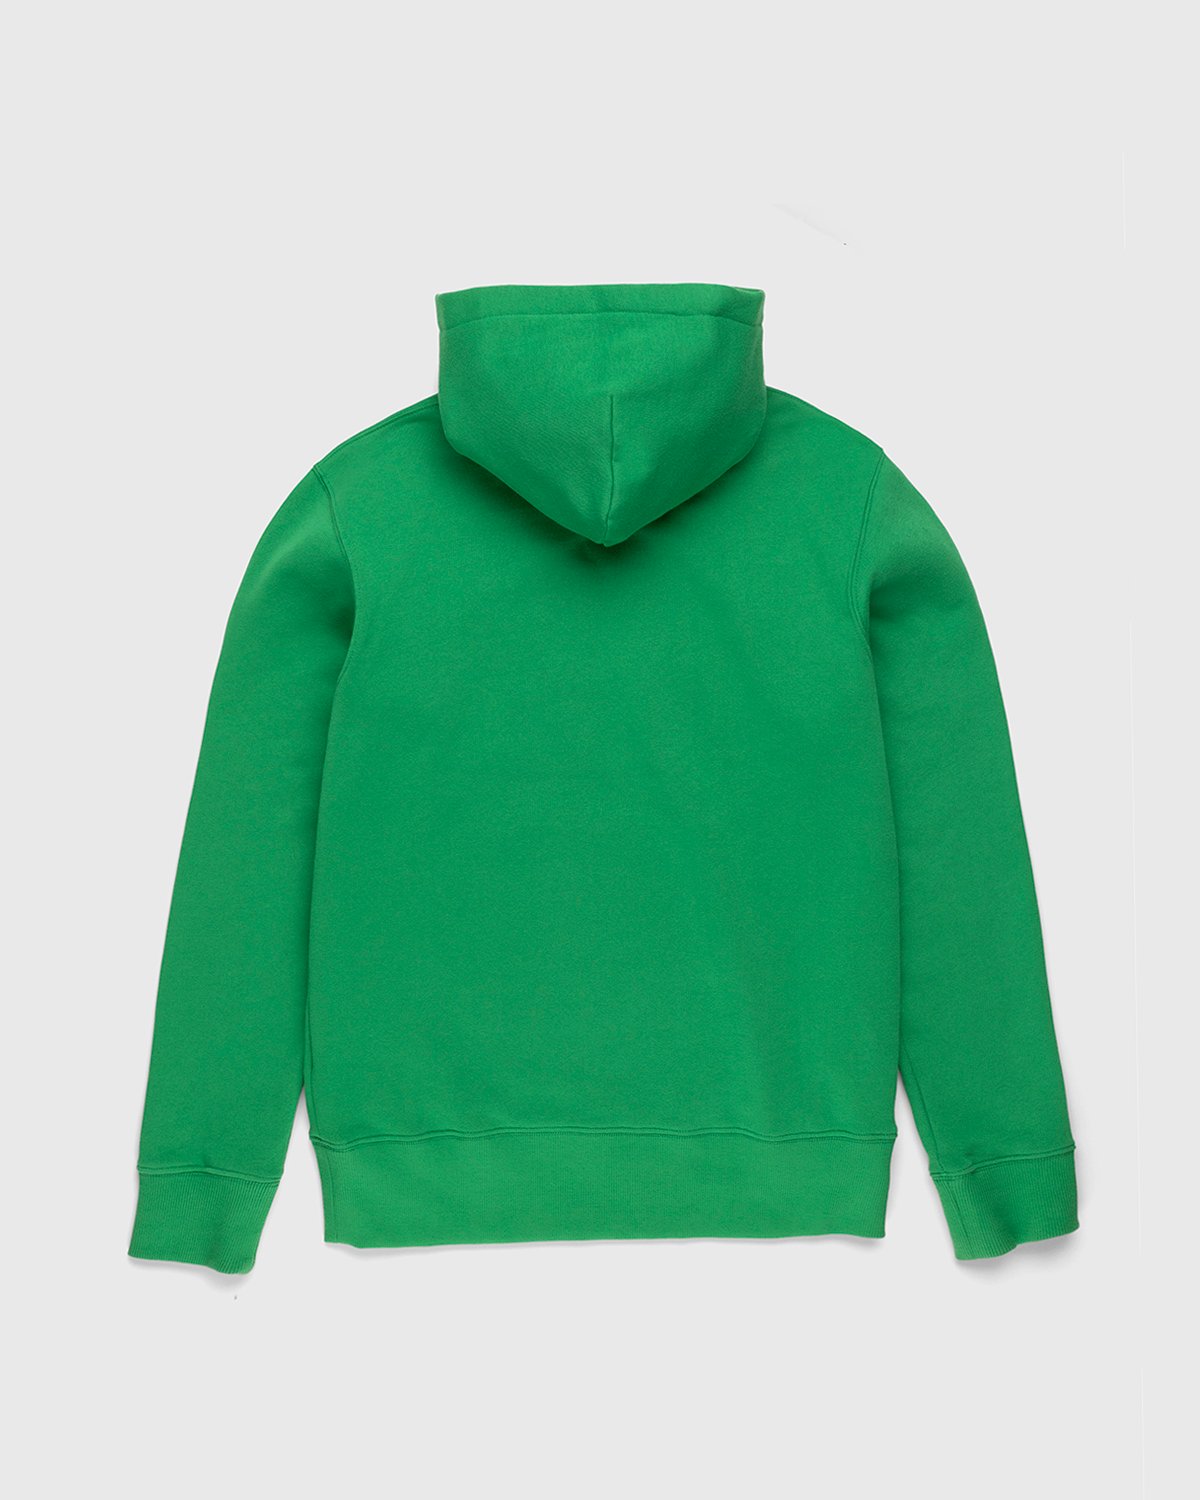 J.W. Anderson - Classic Logo Hoodie Green - Clothing - Green - Image 2